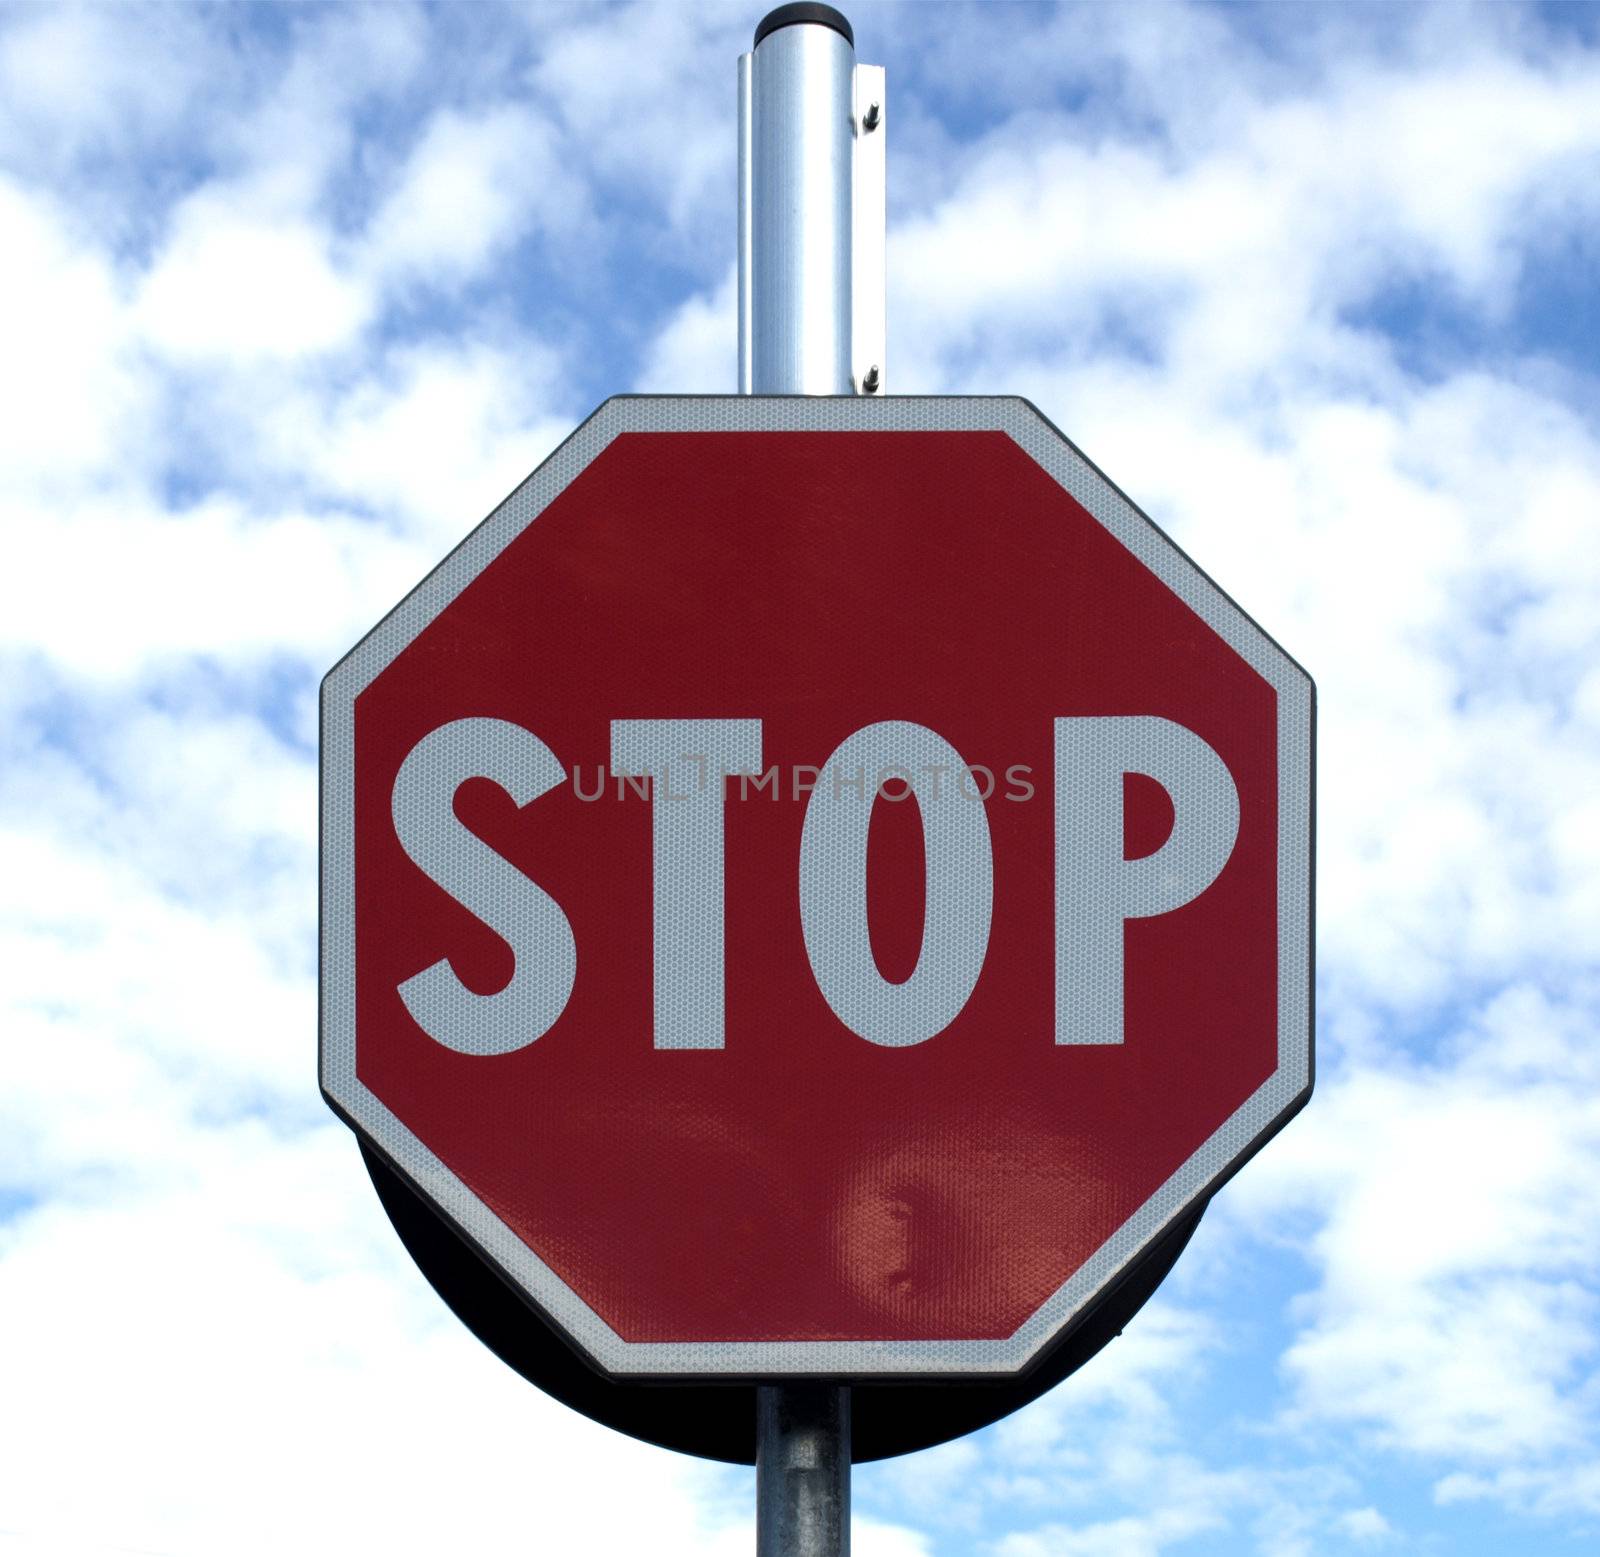 Stop traffic sign over blue sky with clouds